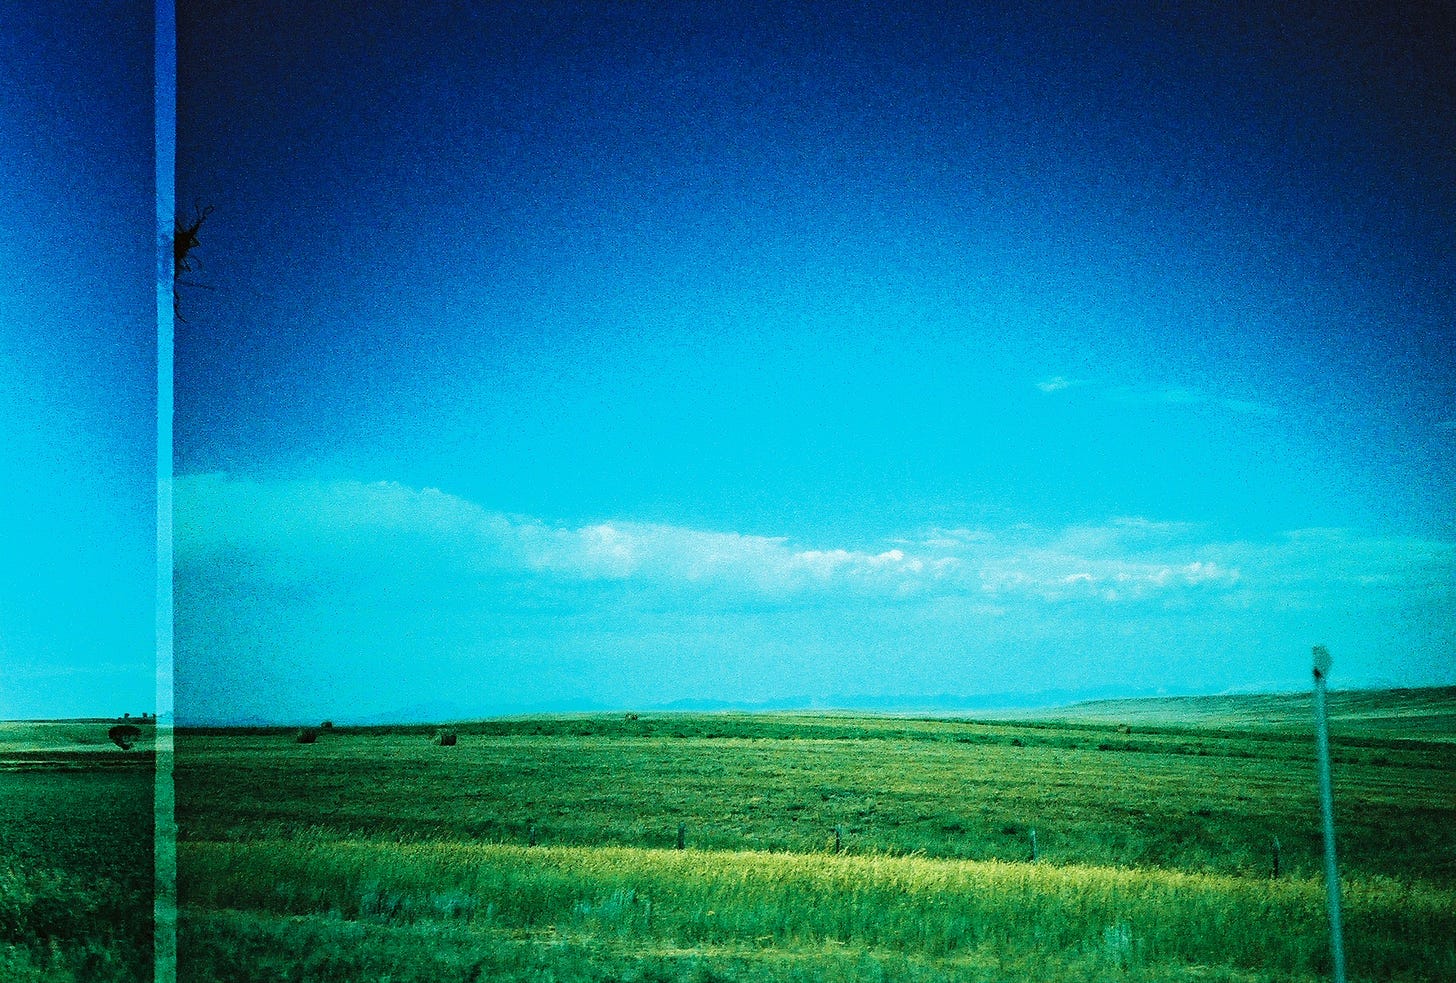 A cross-processed photo of bright green grass beneath a bright blue sky.